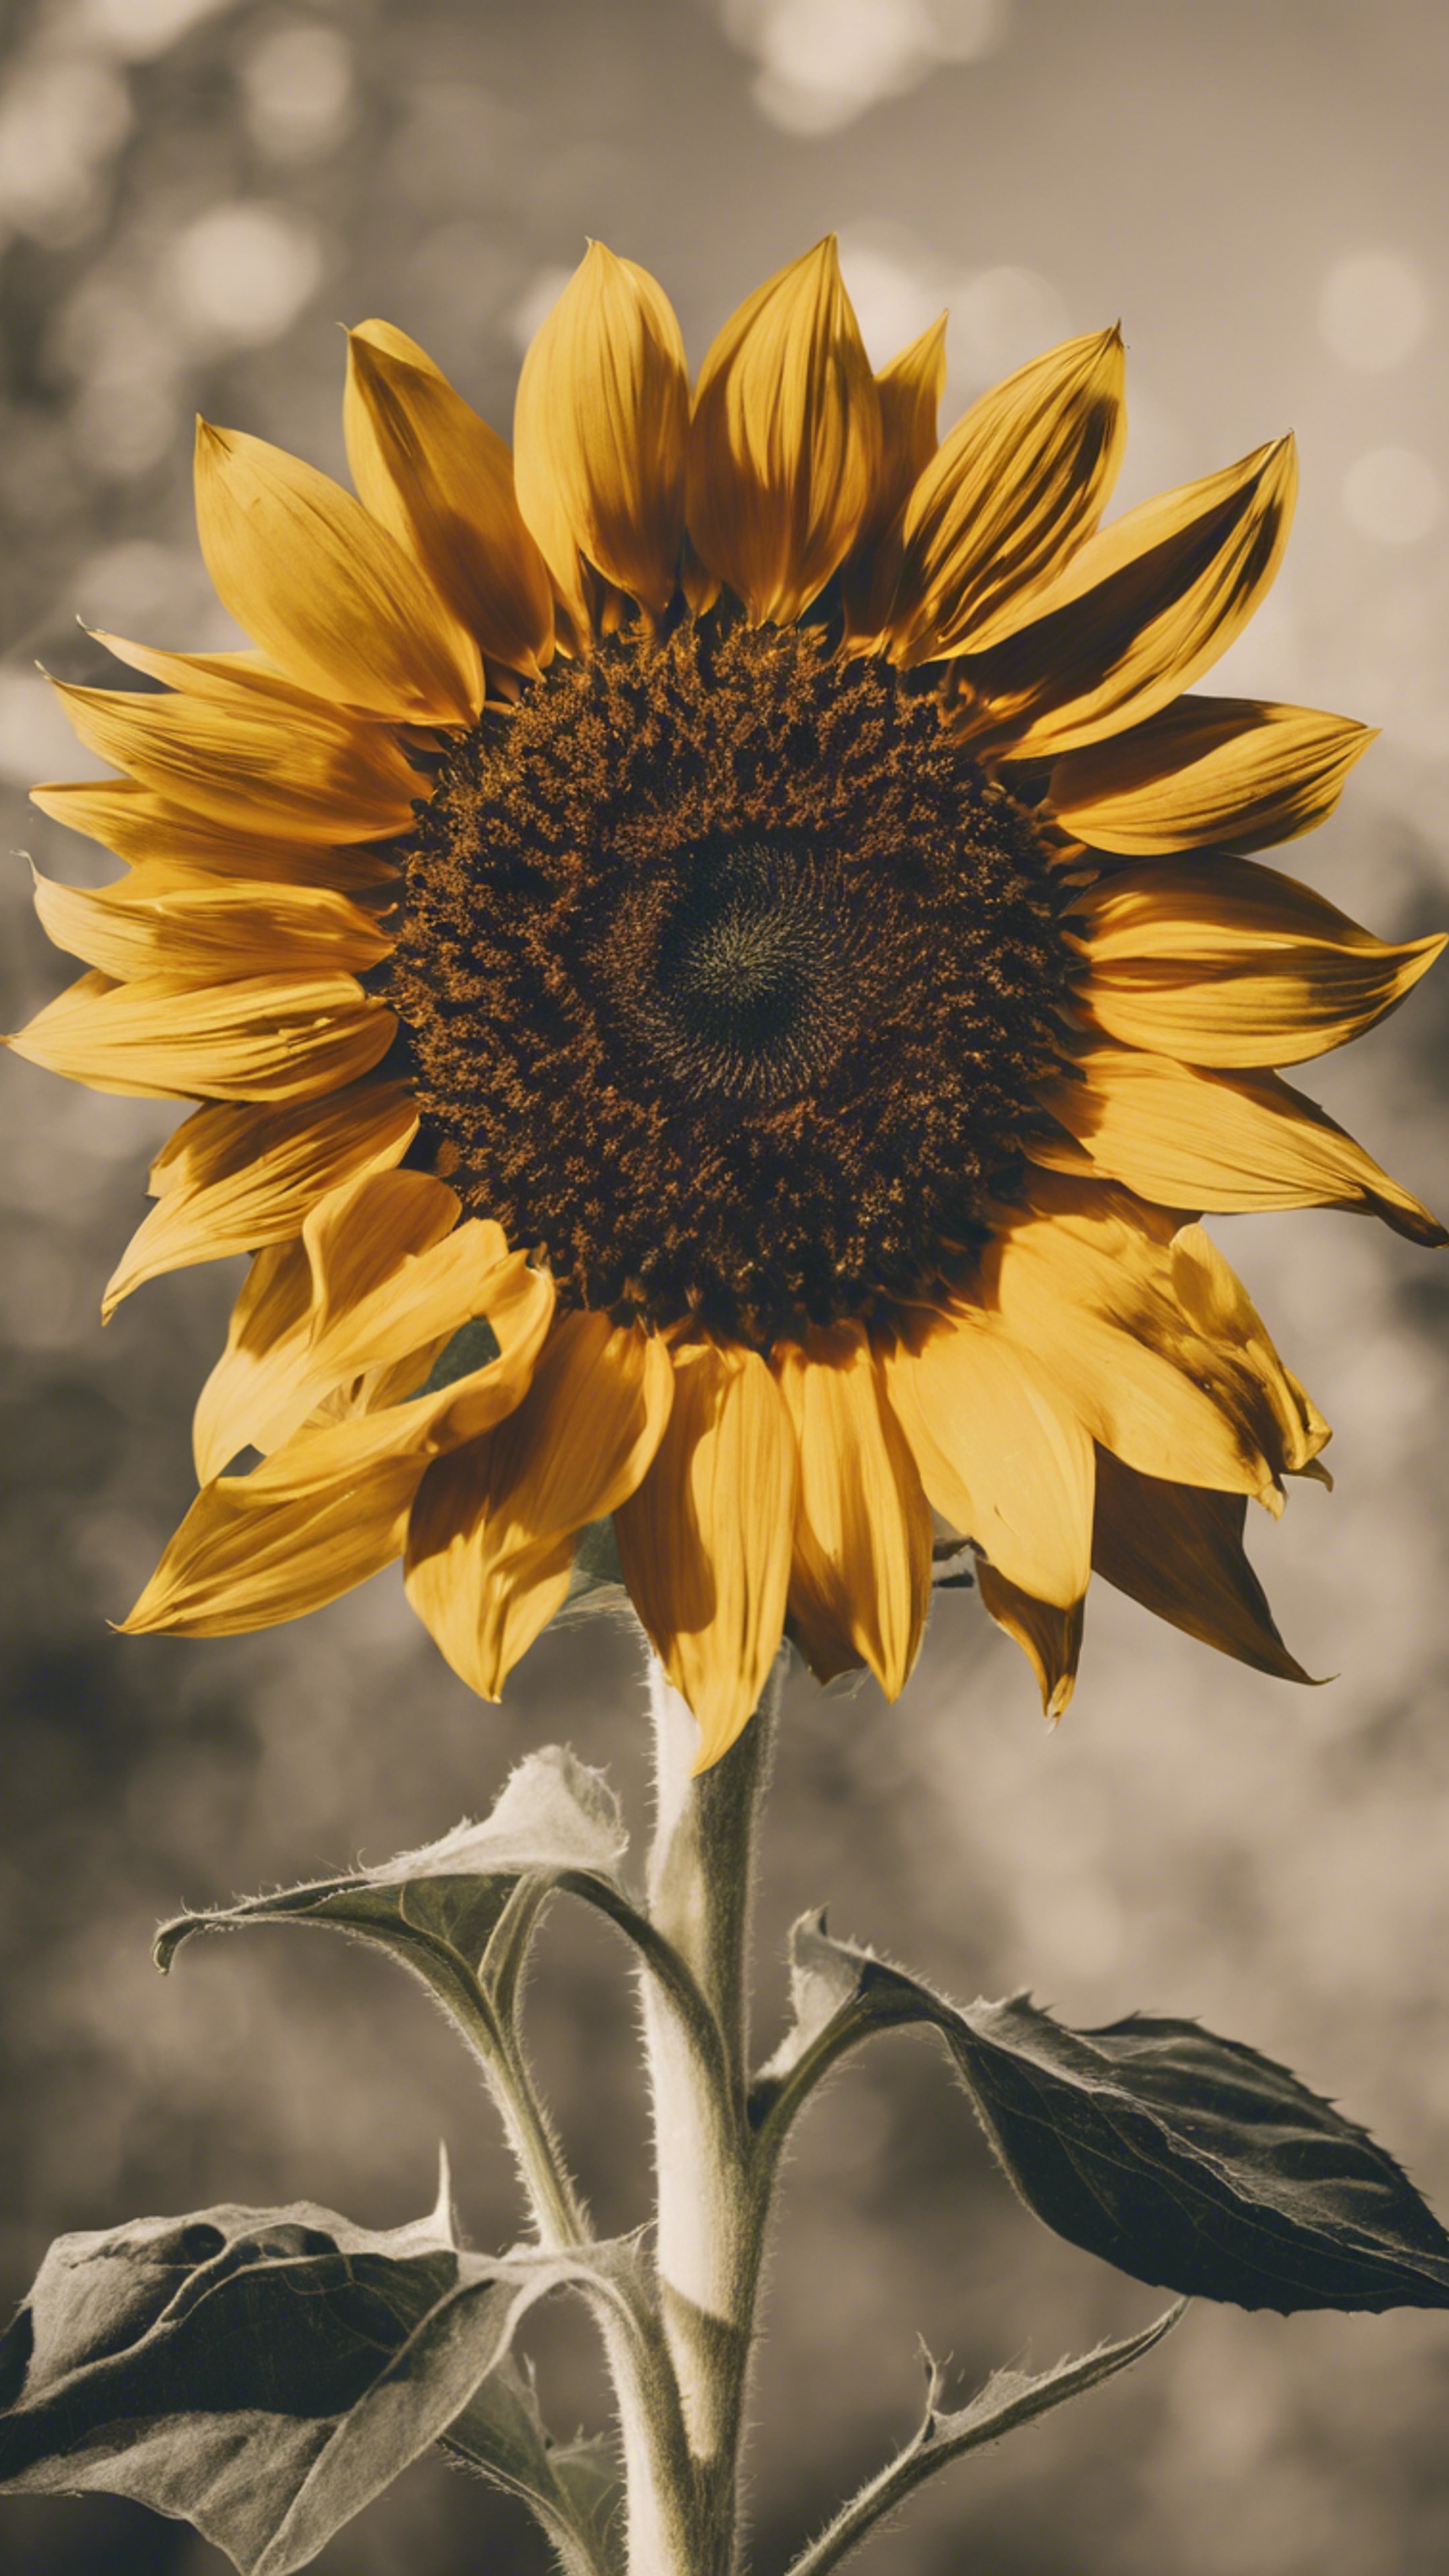 A stylized retro sunflower with bold yellow petals and a dark brown center. Tapéta[13785a0774844f708a81]